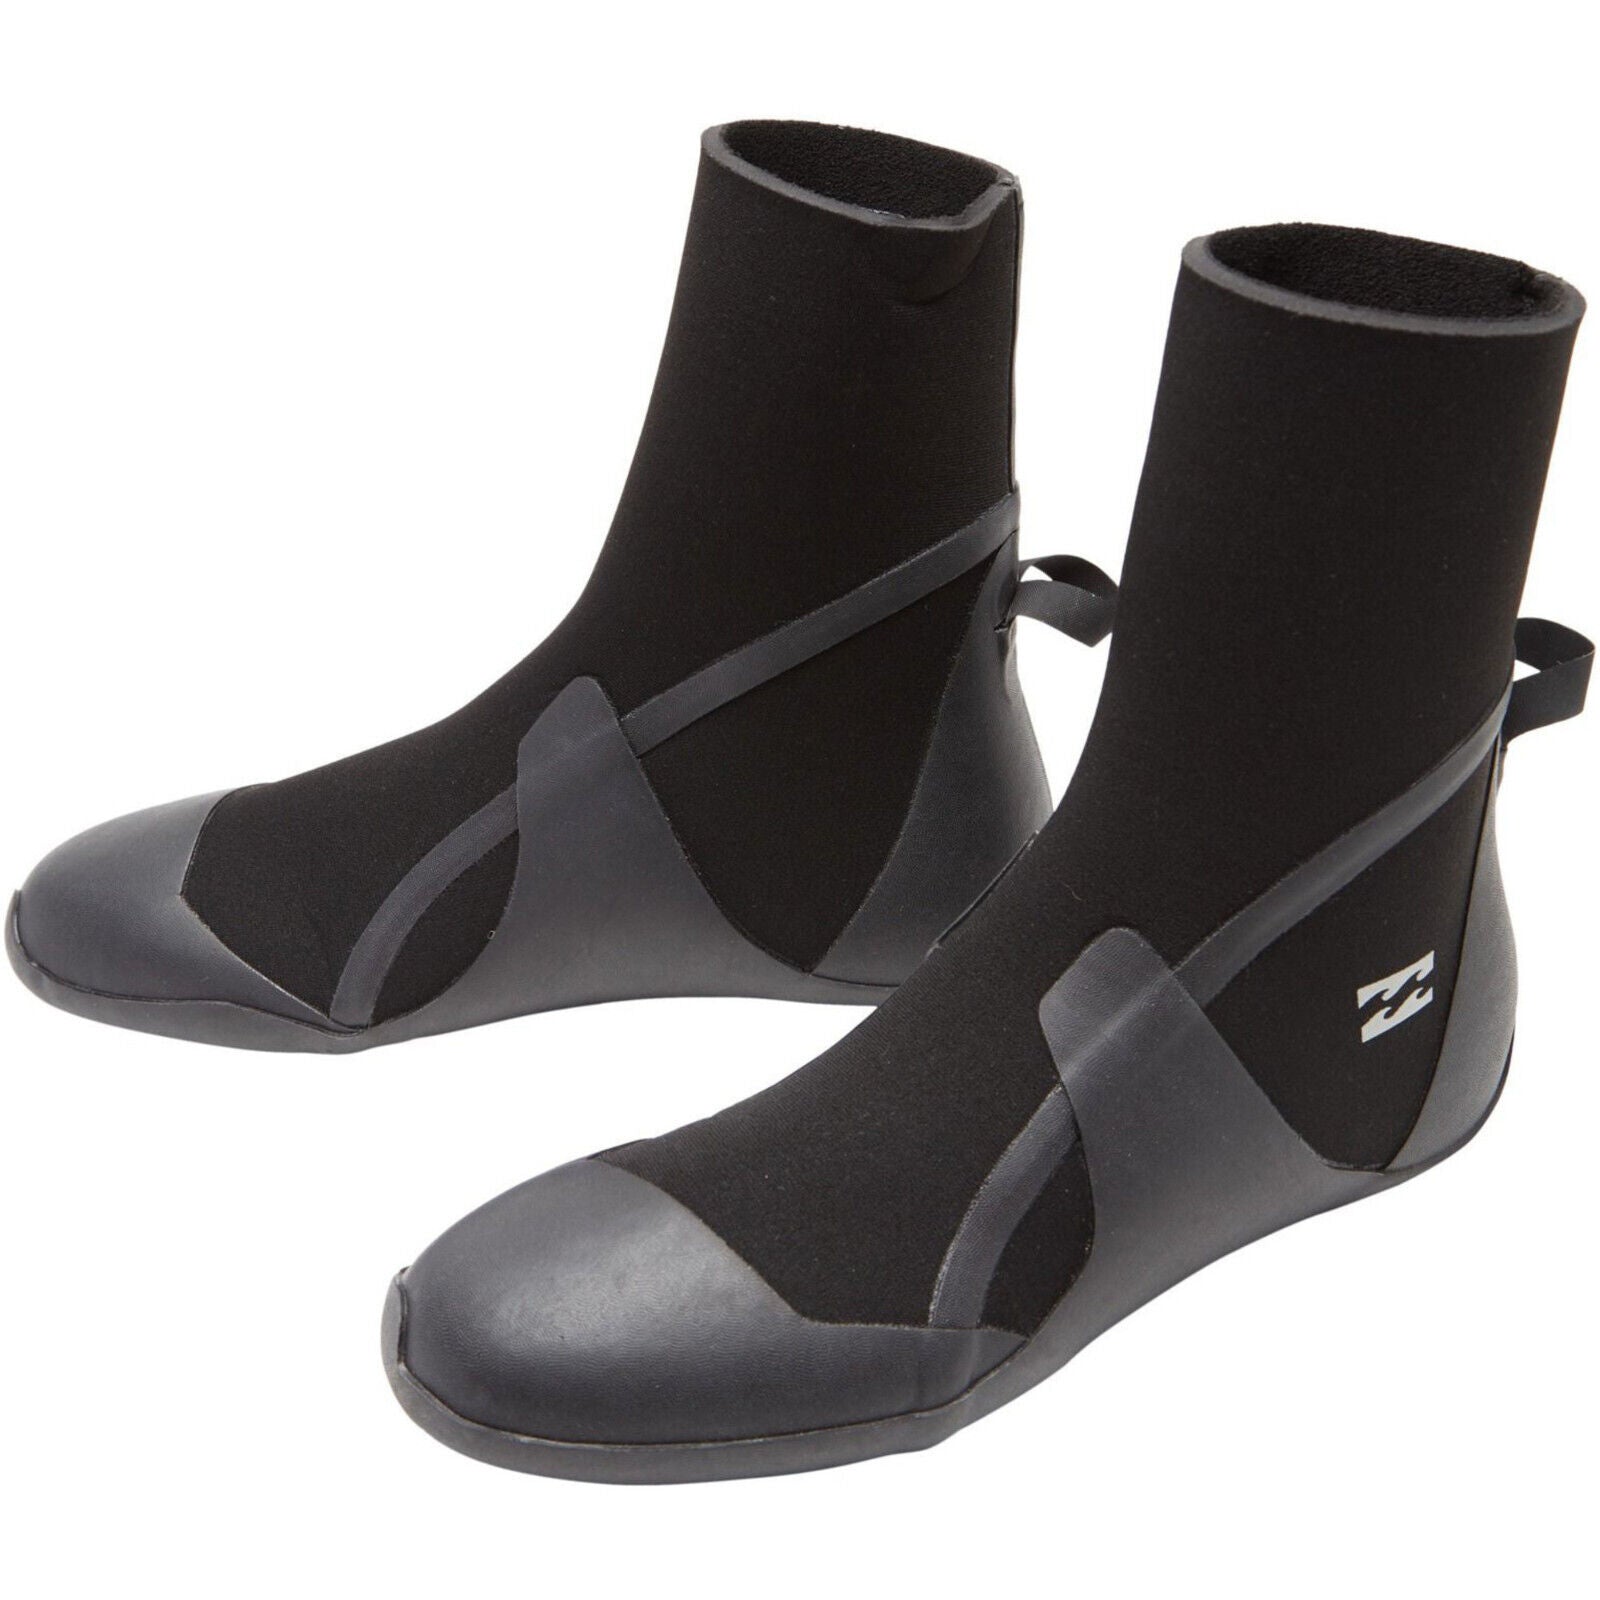 Billabong Absolute 3mm Round Toe Wetsuit Boots